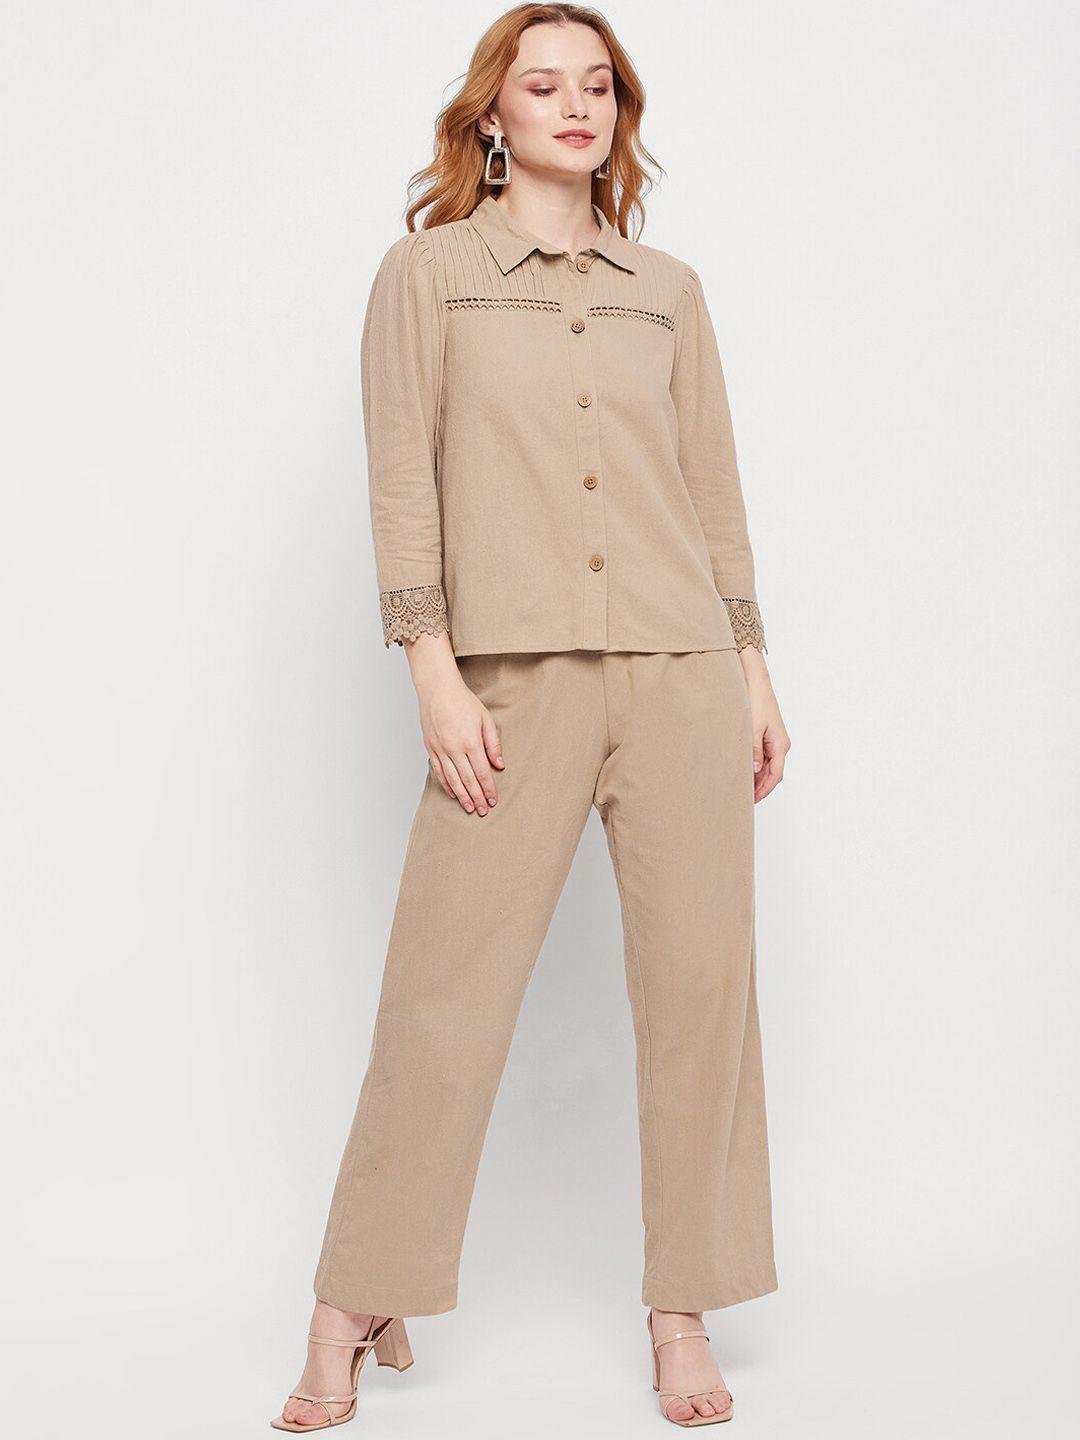 delan pure cotton shirt with trousers